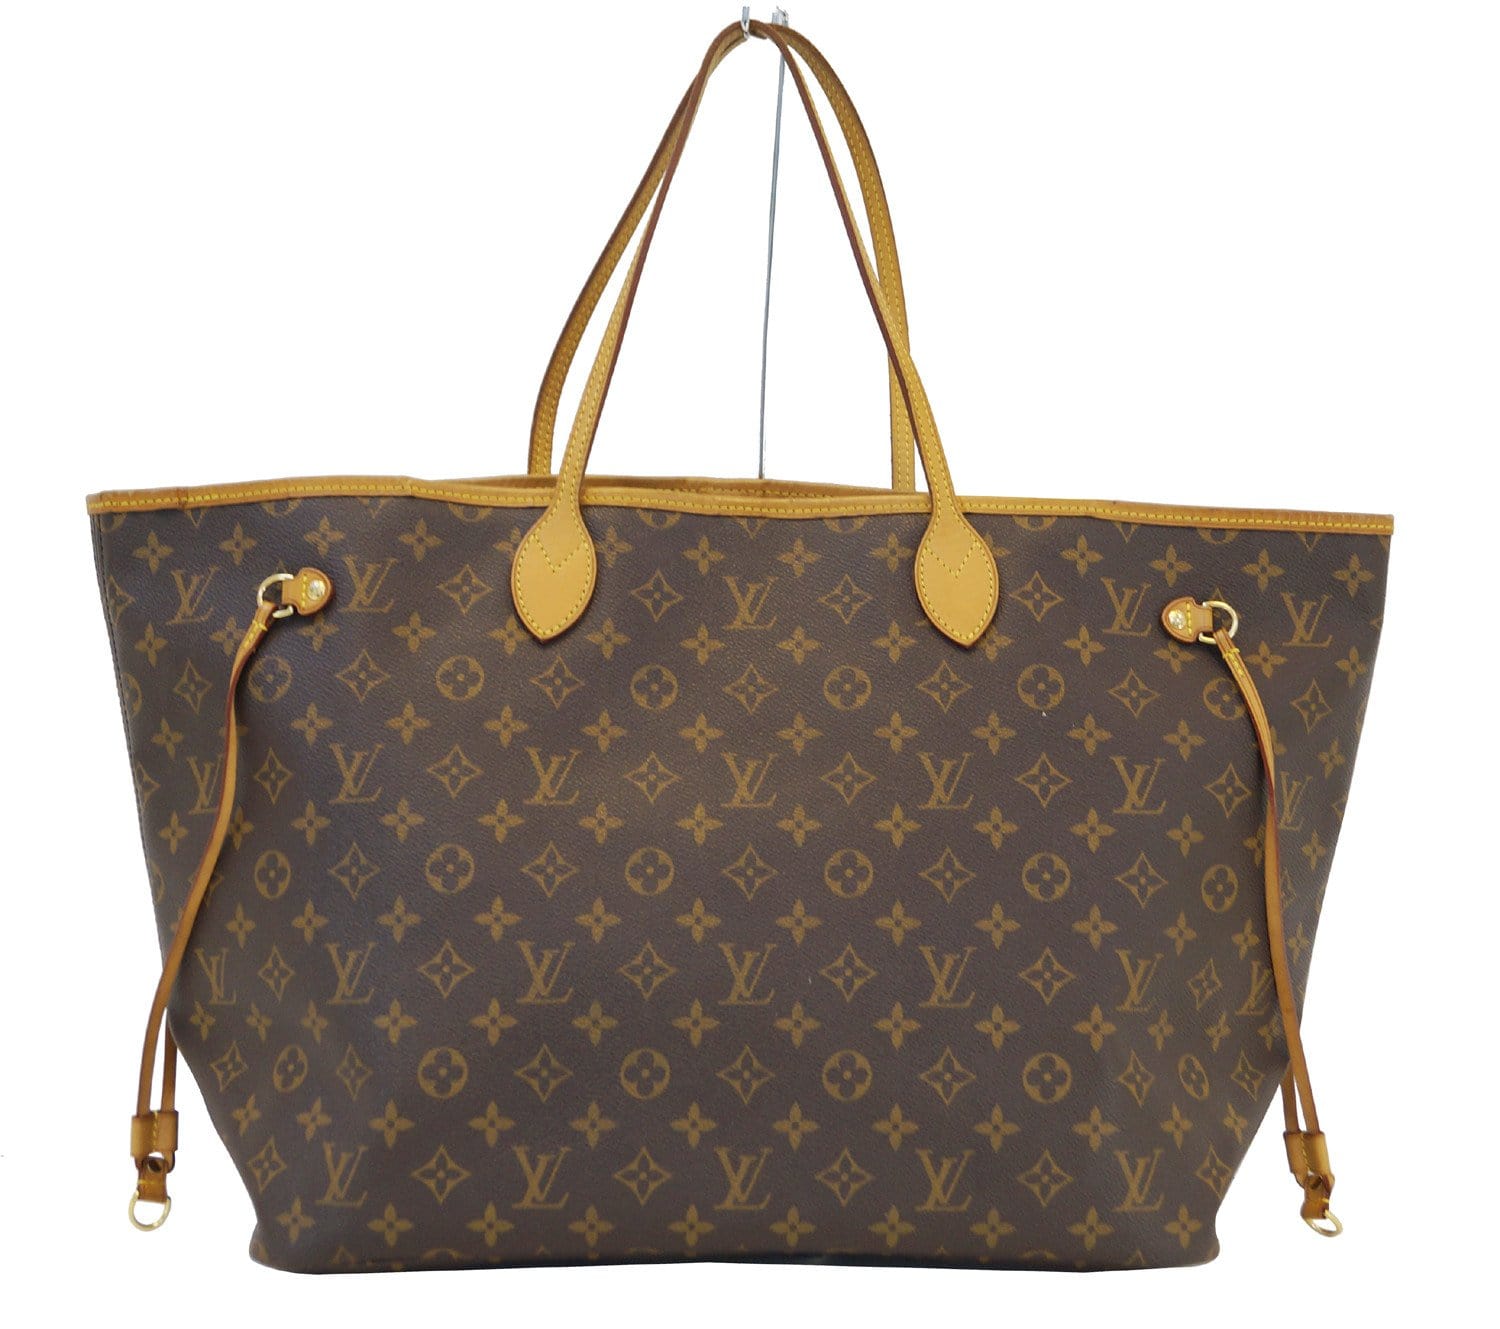 ✨Gently used neverfull gm. In great condition. Dimensions: 15.7